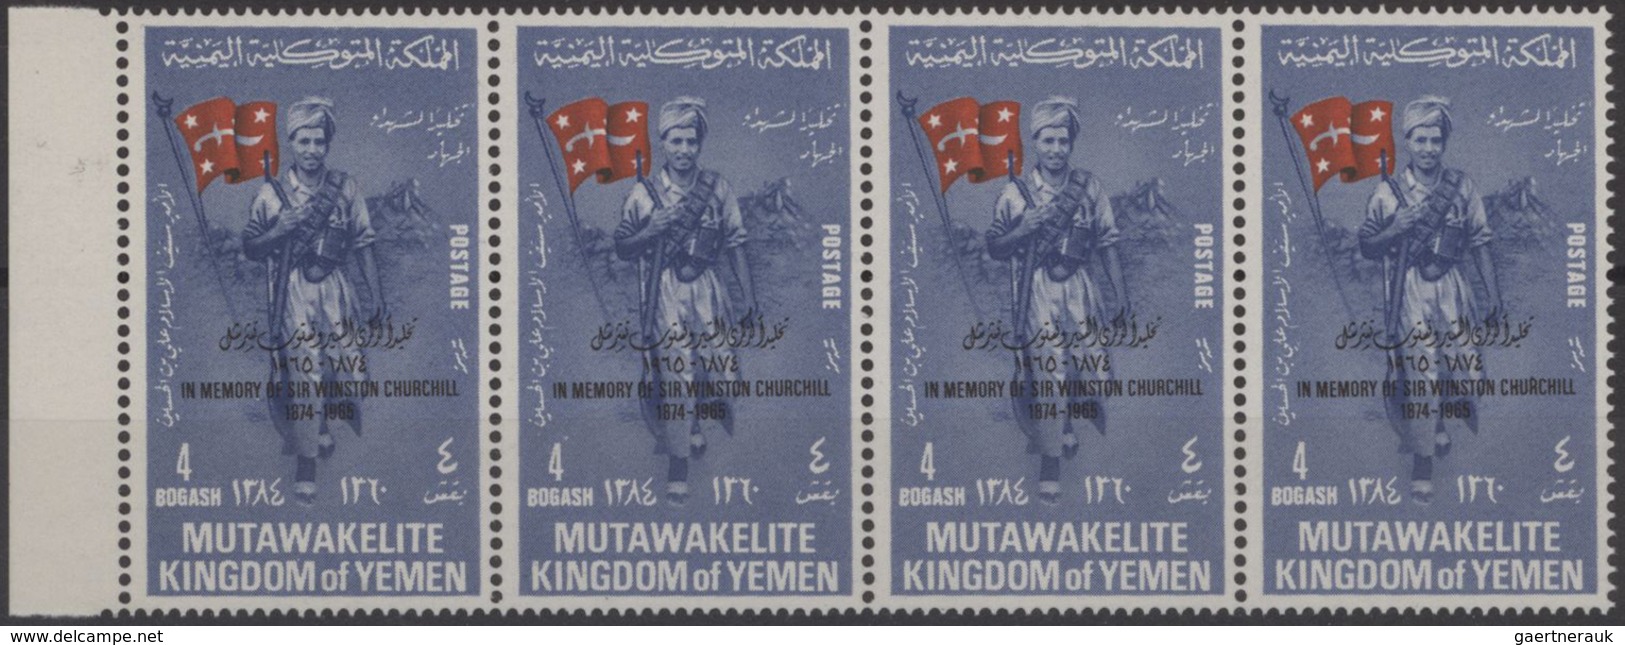 Naher Osten: 1954/1972 (ca.), substantial accumulation of only MNH material in a box covering many e